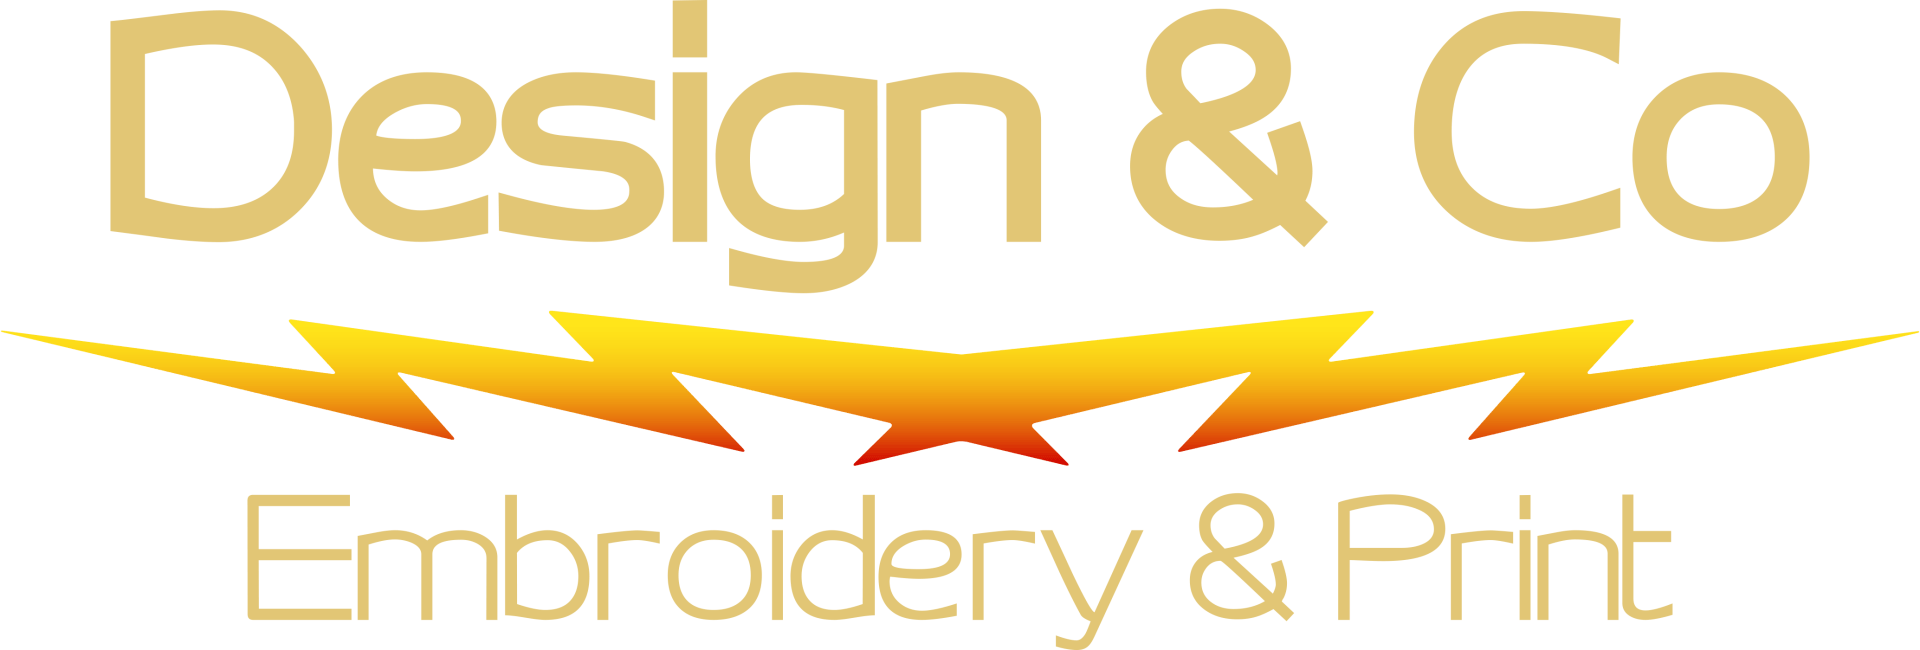 design and co embroidery and print navigation logo